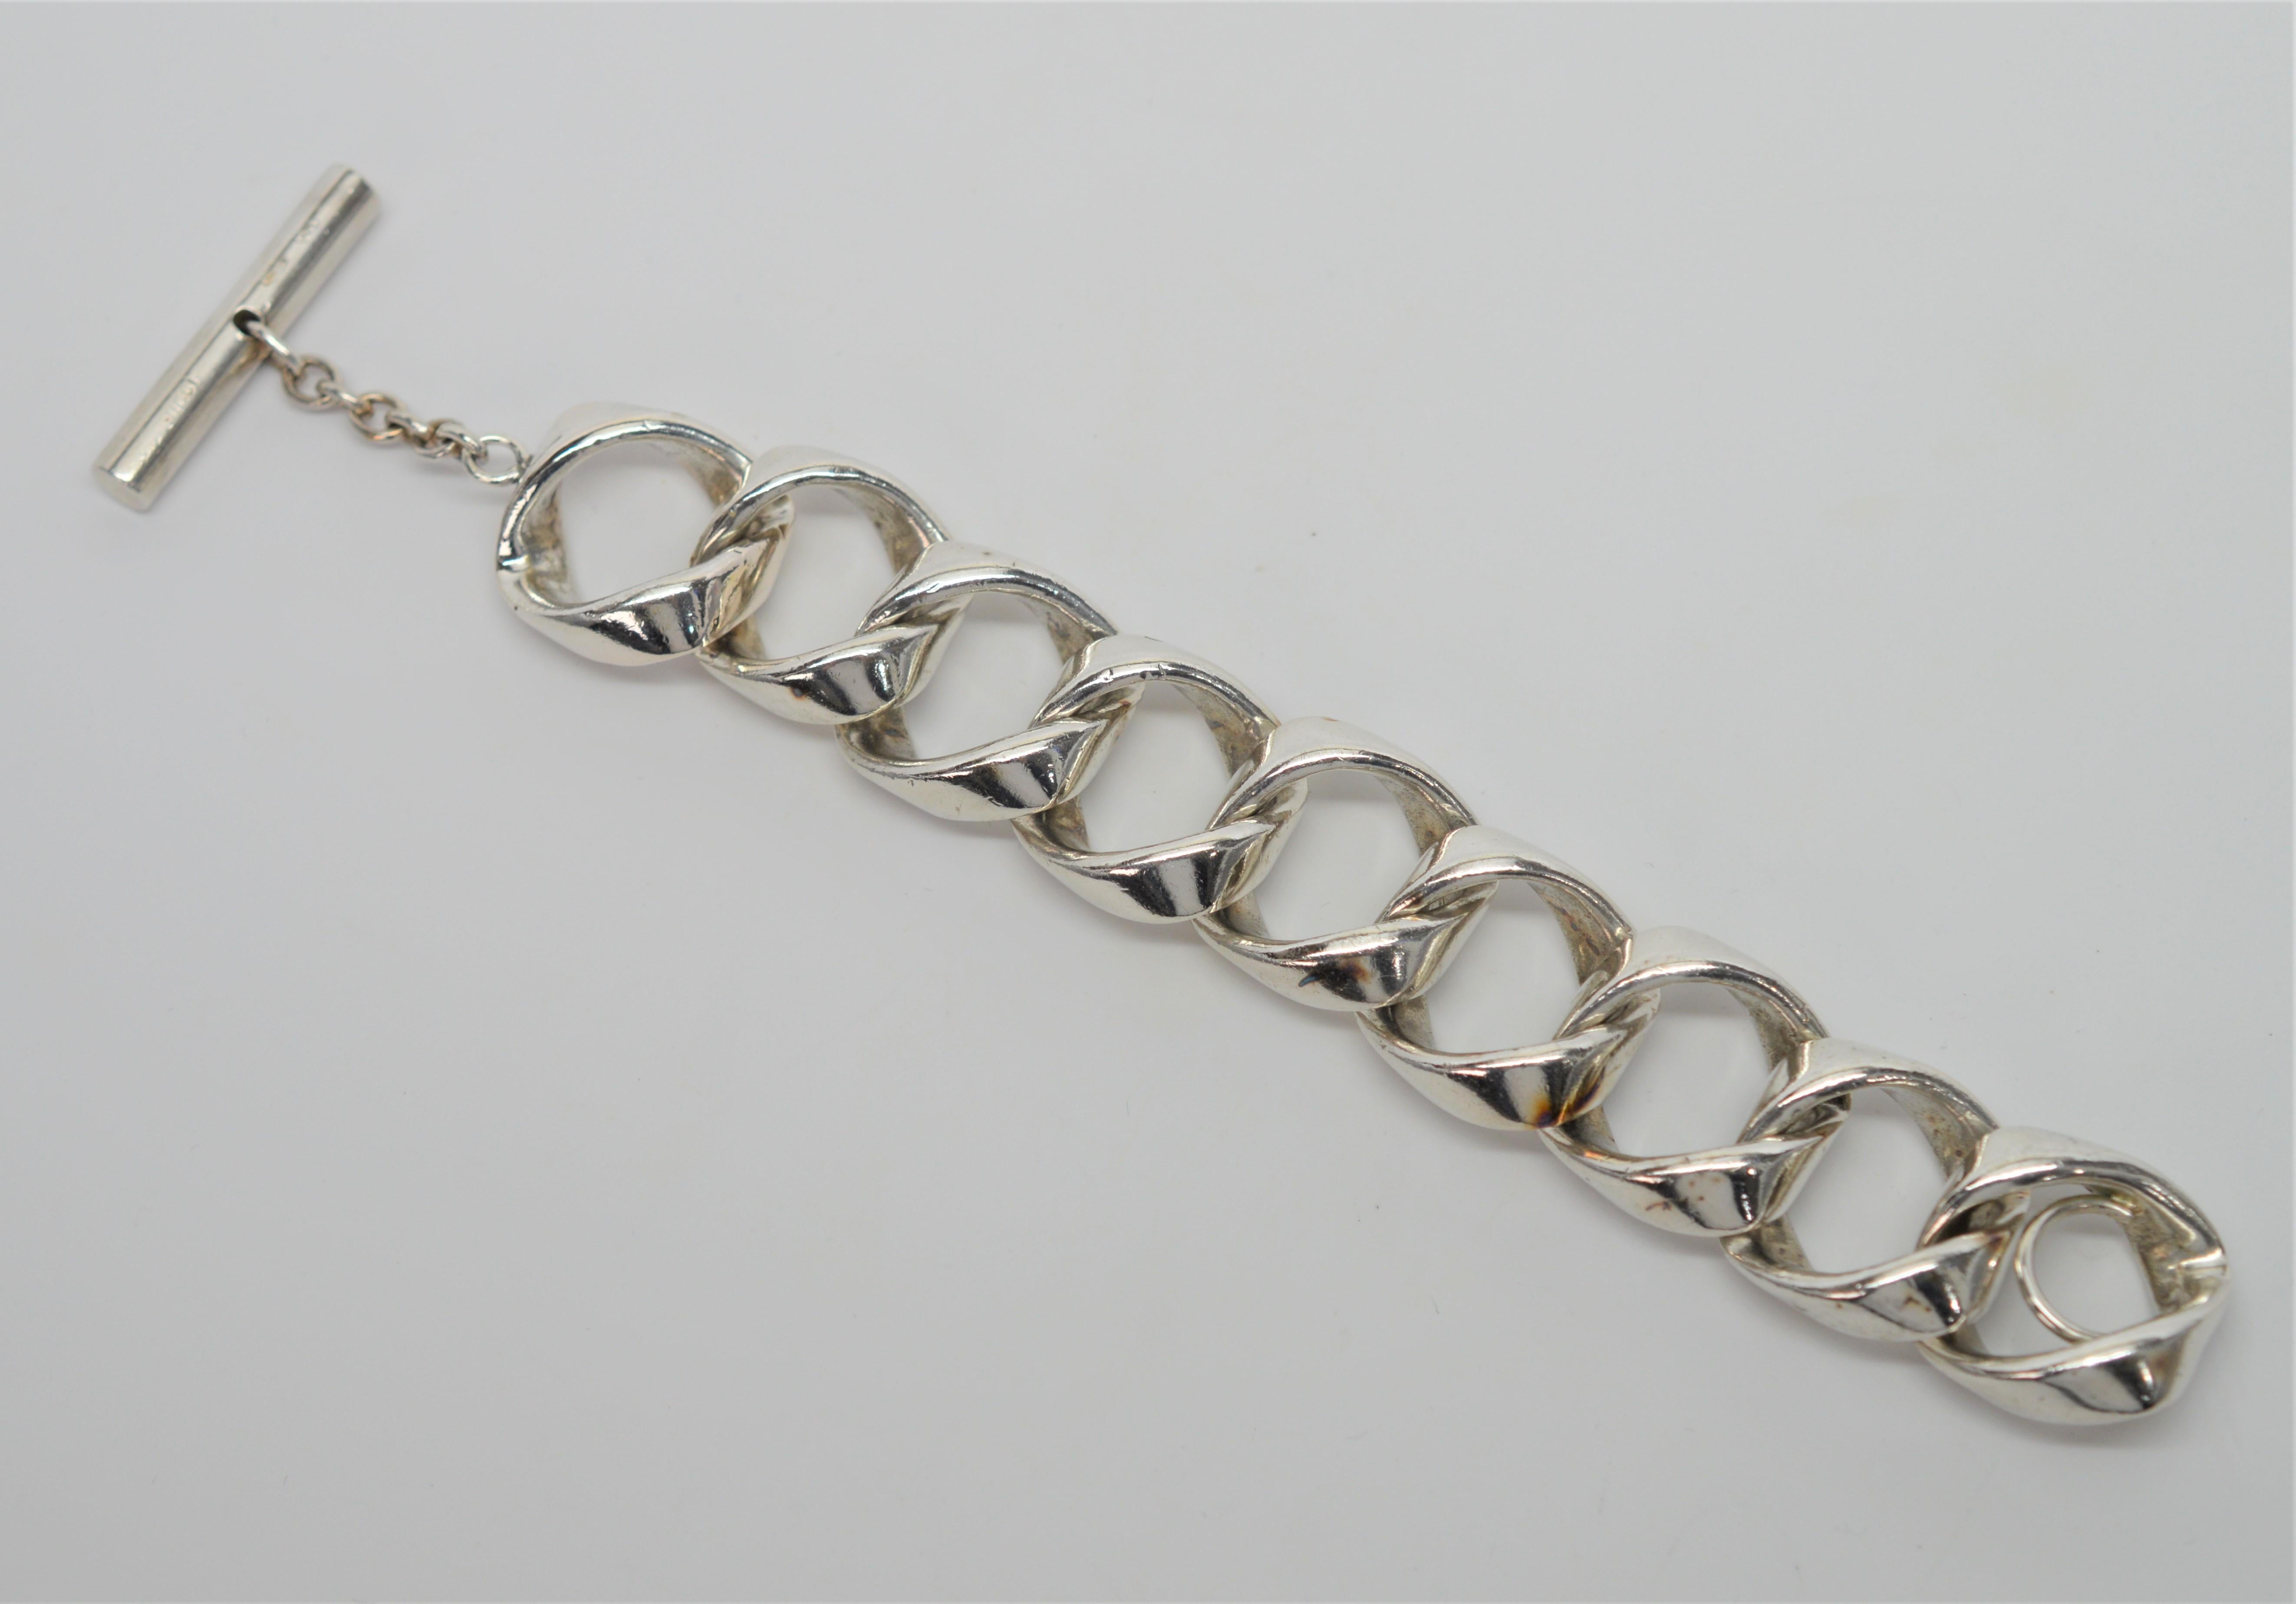 Bold, heavy weight Gucci 1950's Style Sterling Silver Chain Bracelet. Signed by Gucci, this retro statement piece is serious in size and weight and not for the faint at heart. This bracelet length is seven inches with a toggle closure. Showing some